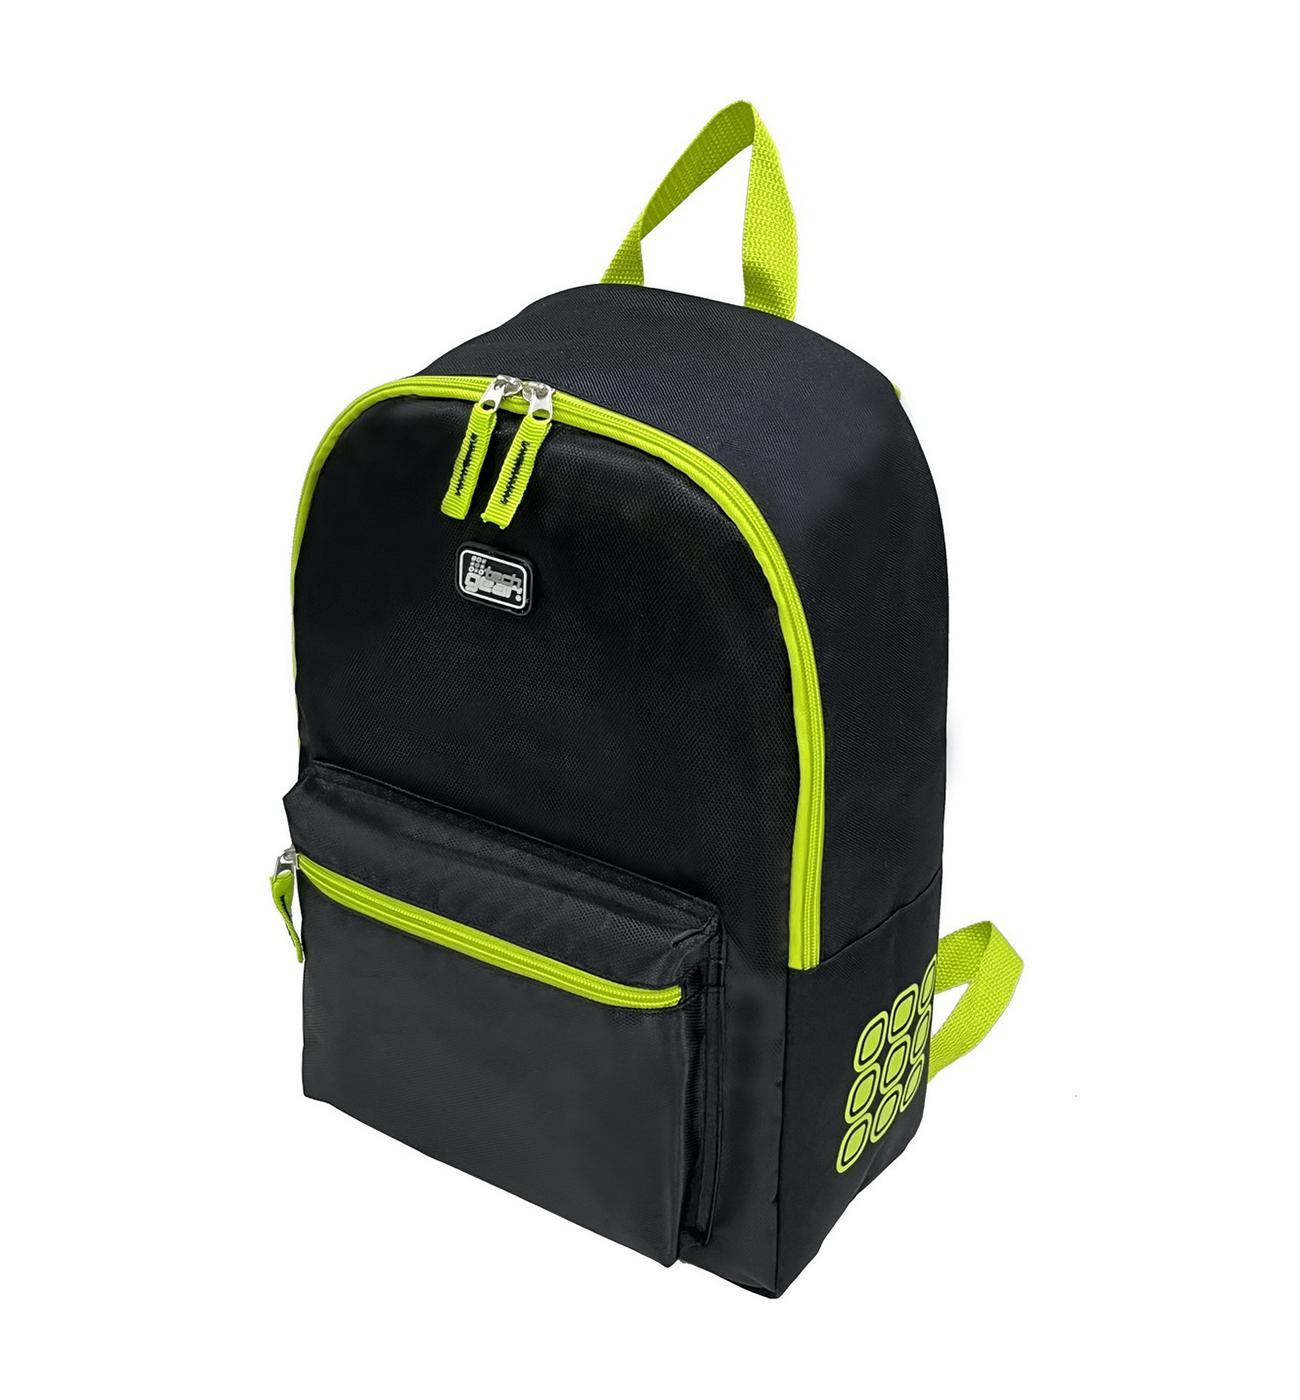 Tech Gear Classic Backpack - Black & Green; image 2 of 4